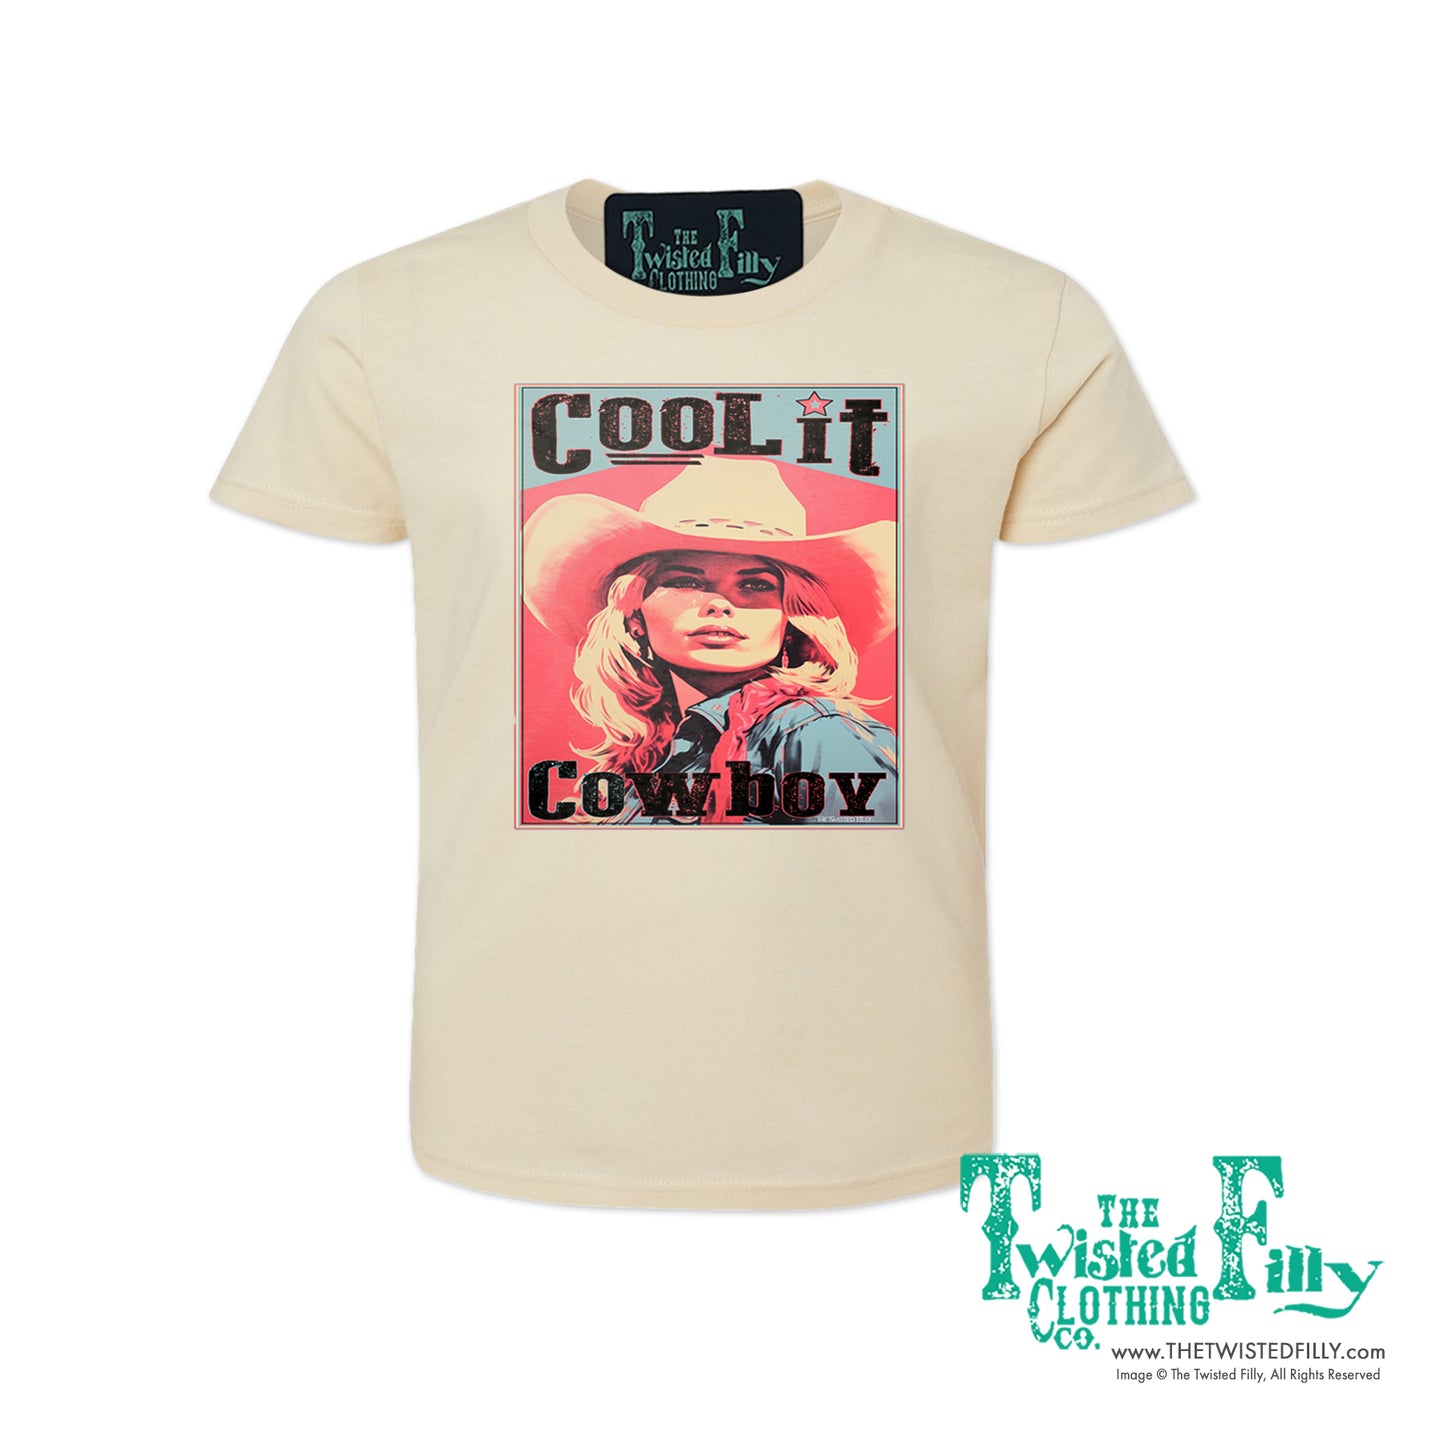 Cool It Cowboy - S/S Adult Crew Neck Womens Tee - Assorted Colors